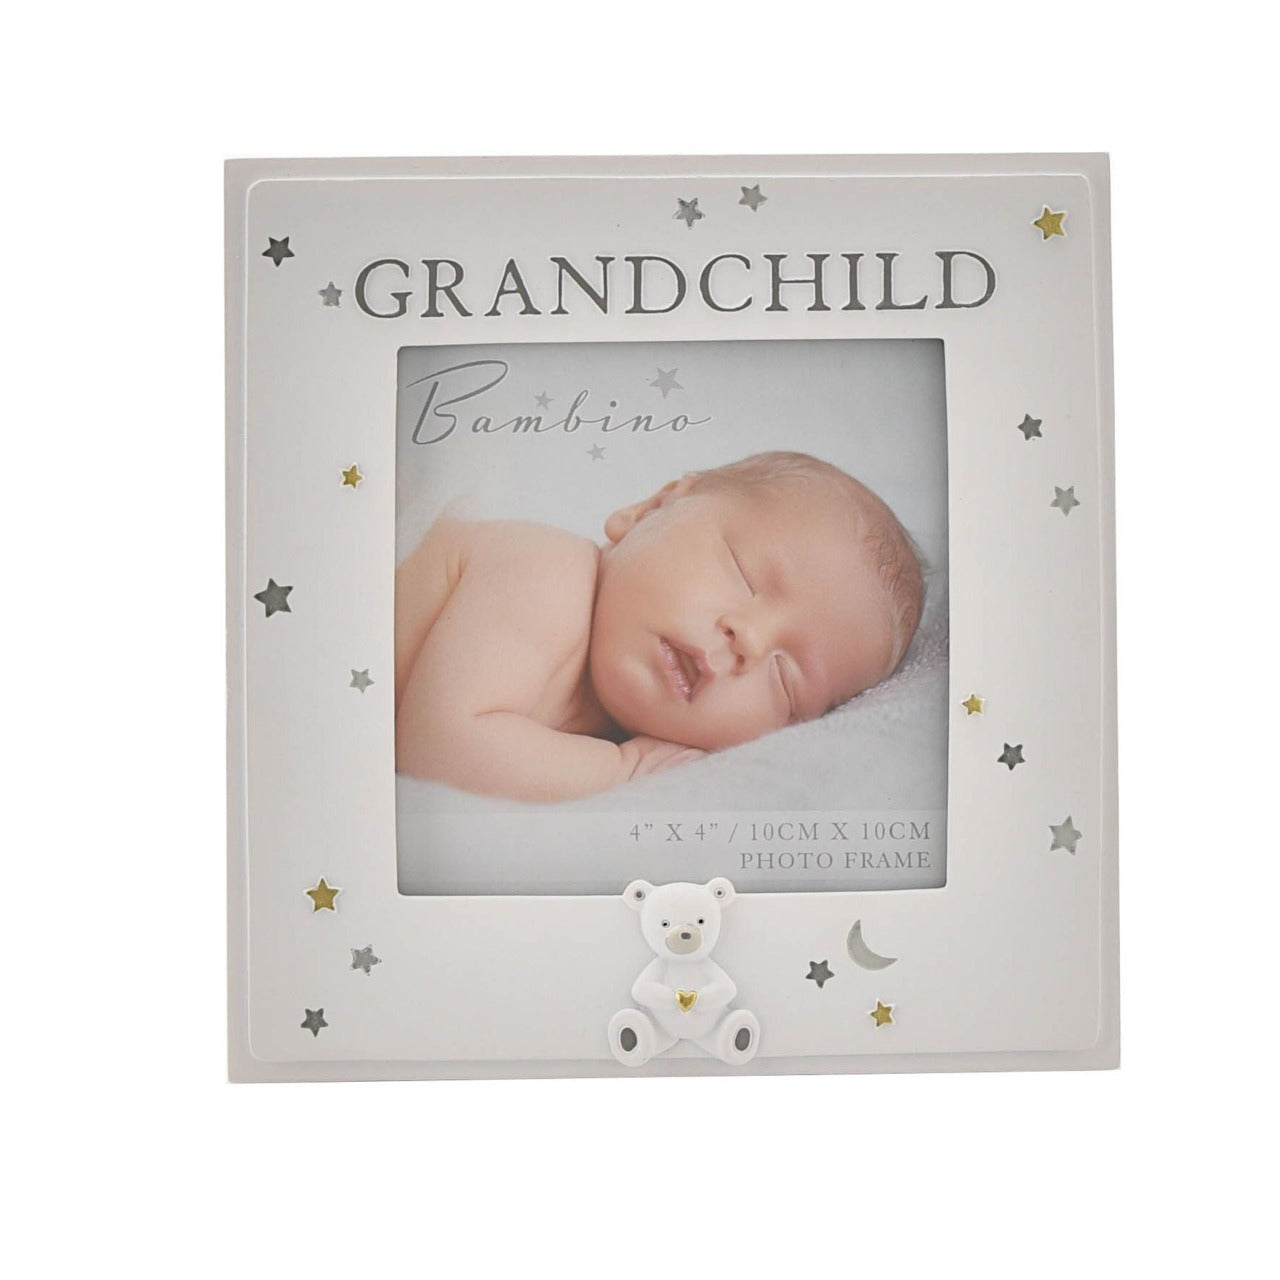 Bambino Resin Grandchild Photo Frame 4" x 4"  A Grandchild photo frame from BAMBINO BY JULIANA®.  This affectionately personalised frame is a heart-warming gift for new grandparents.